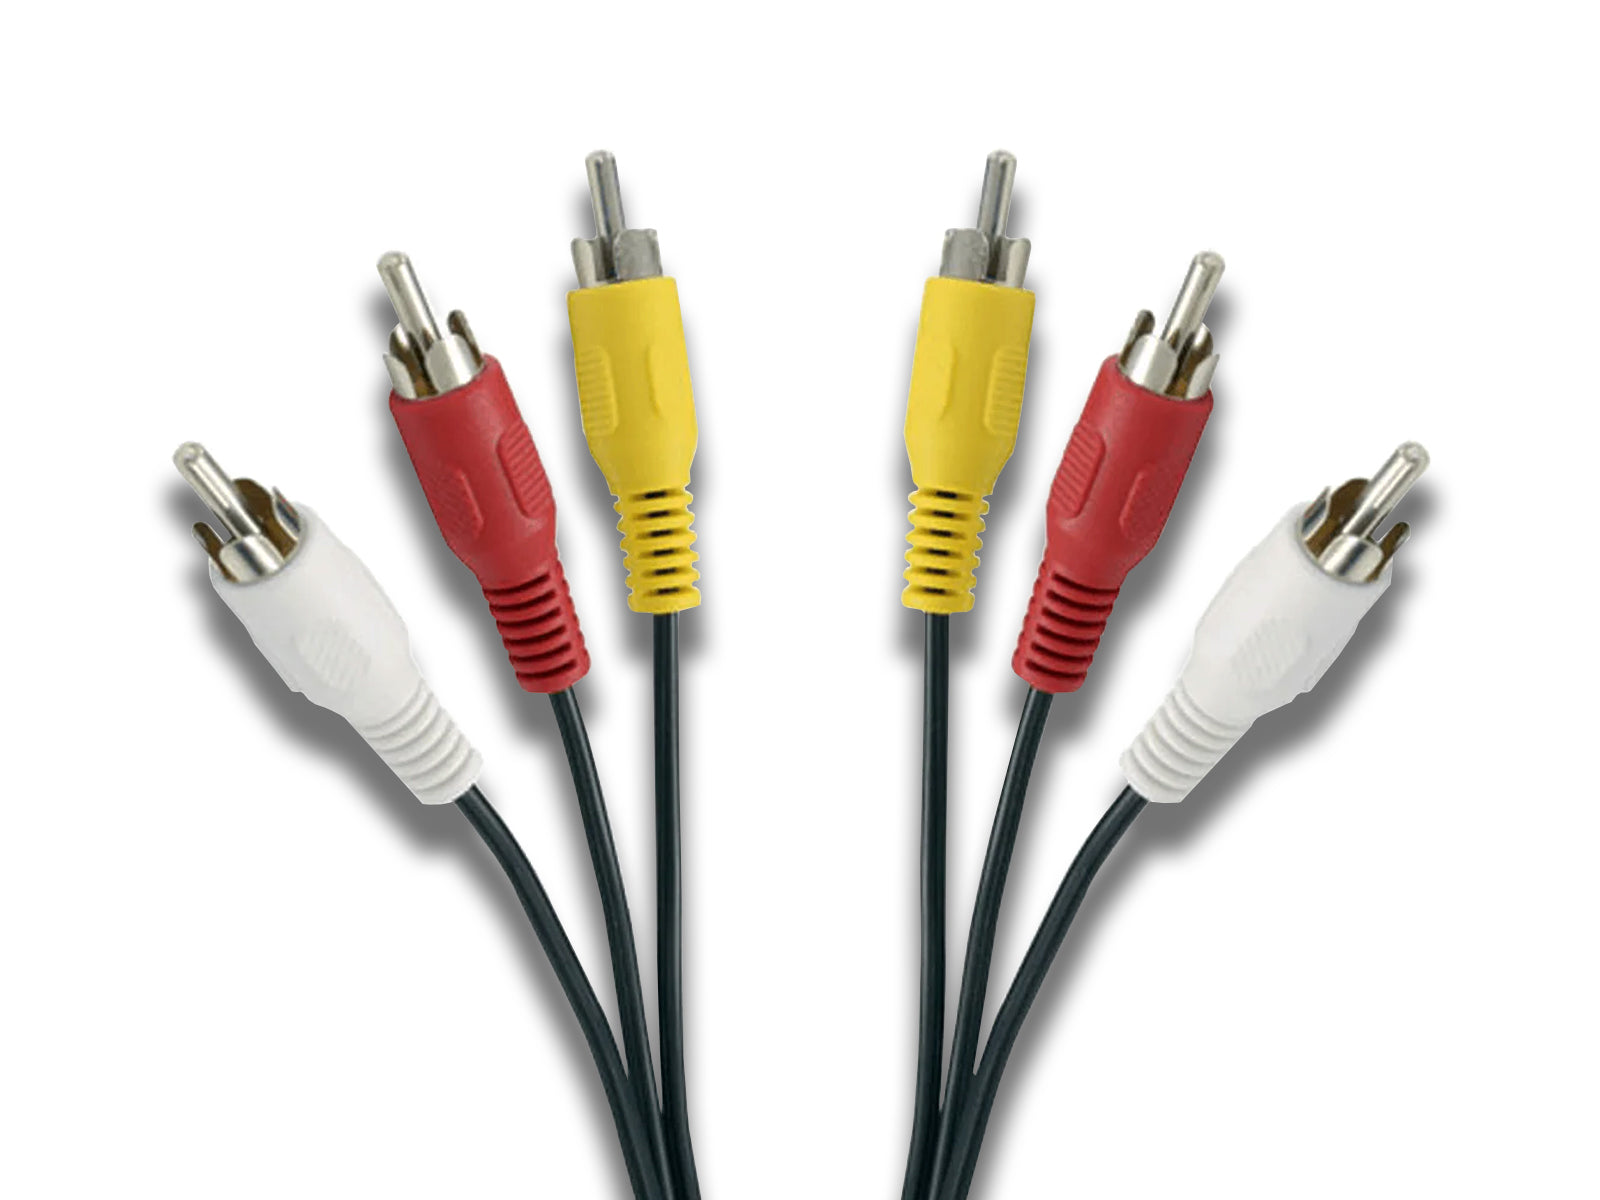 RCA Audio Cable White, Yellow & Red Close up View of All Cables